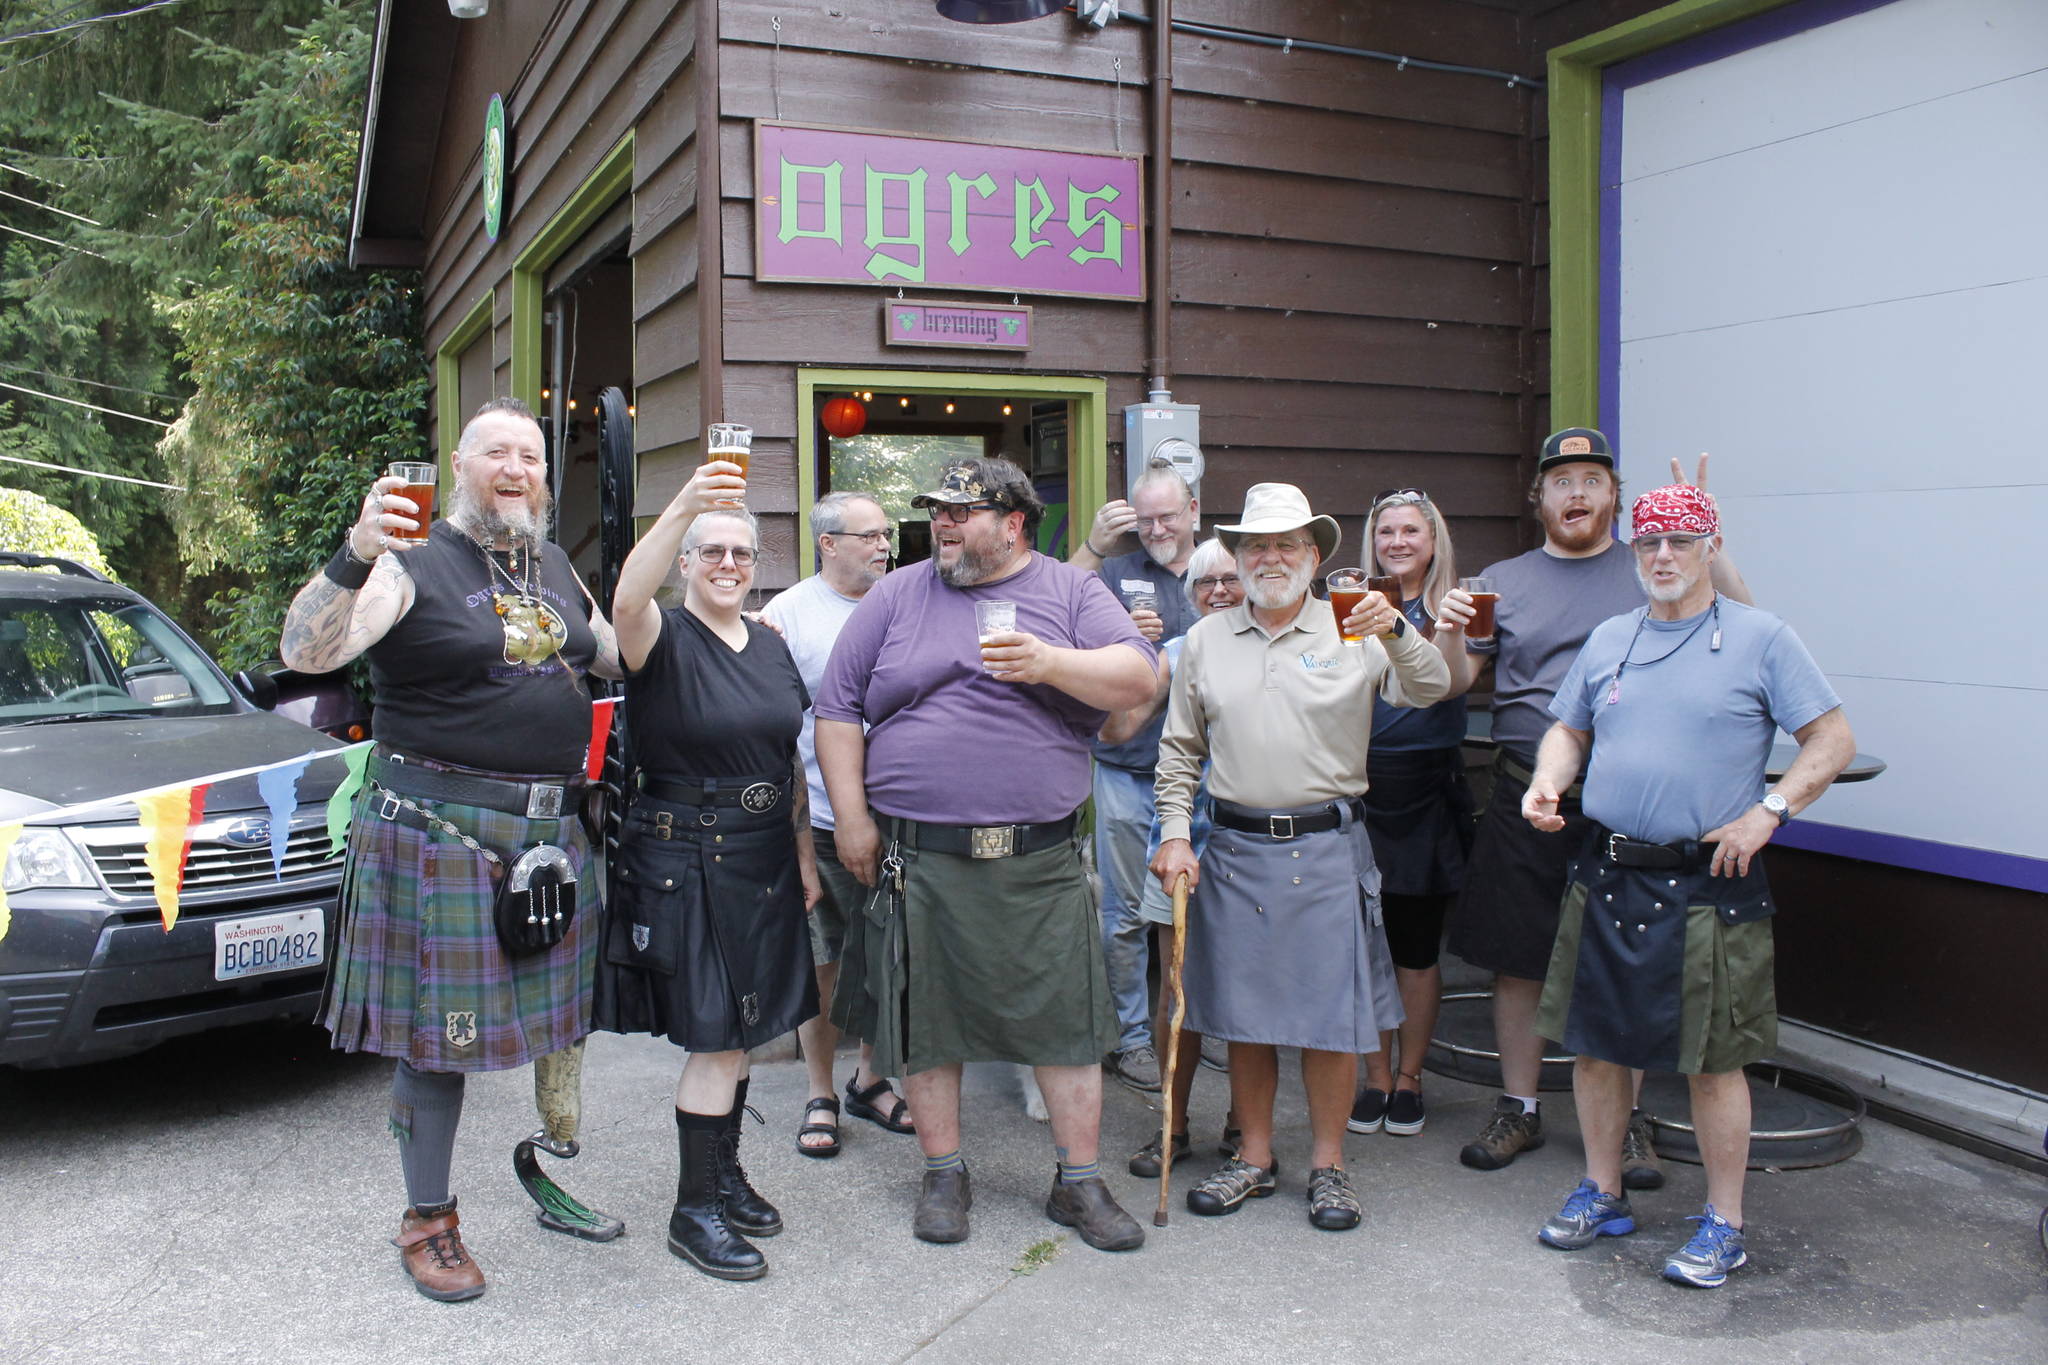 Photo by Kira Erickson/South Whidbey Record
From left to right: Rampant Kilt Society Members Bexar O’Riley, Aimee Shand, Phil Timm, Royce Baker, Dustin Yongue, Gayle and Craig Swanson, Cindi Crowder Rausch, Alex Beust and Will Sperling.